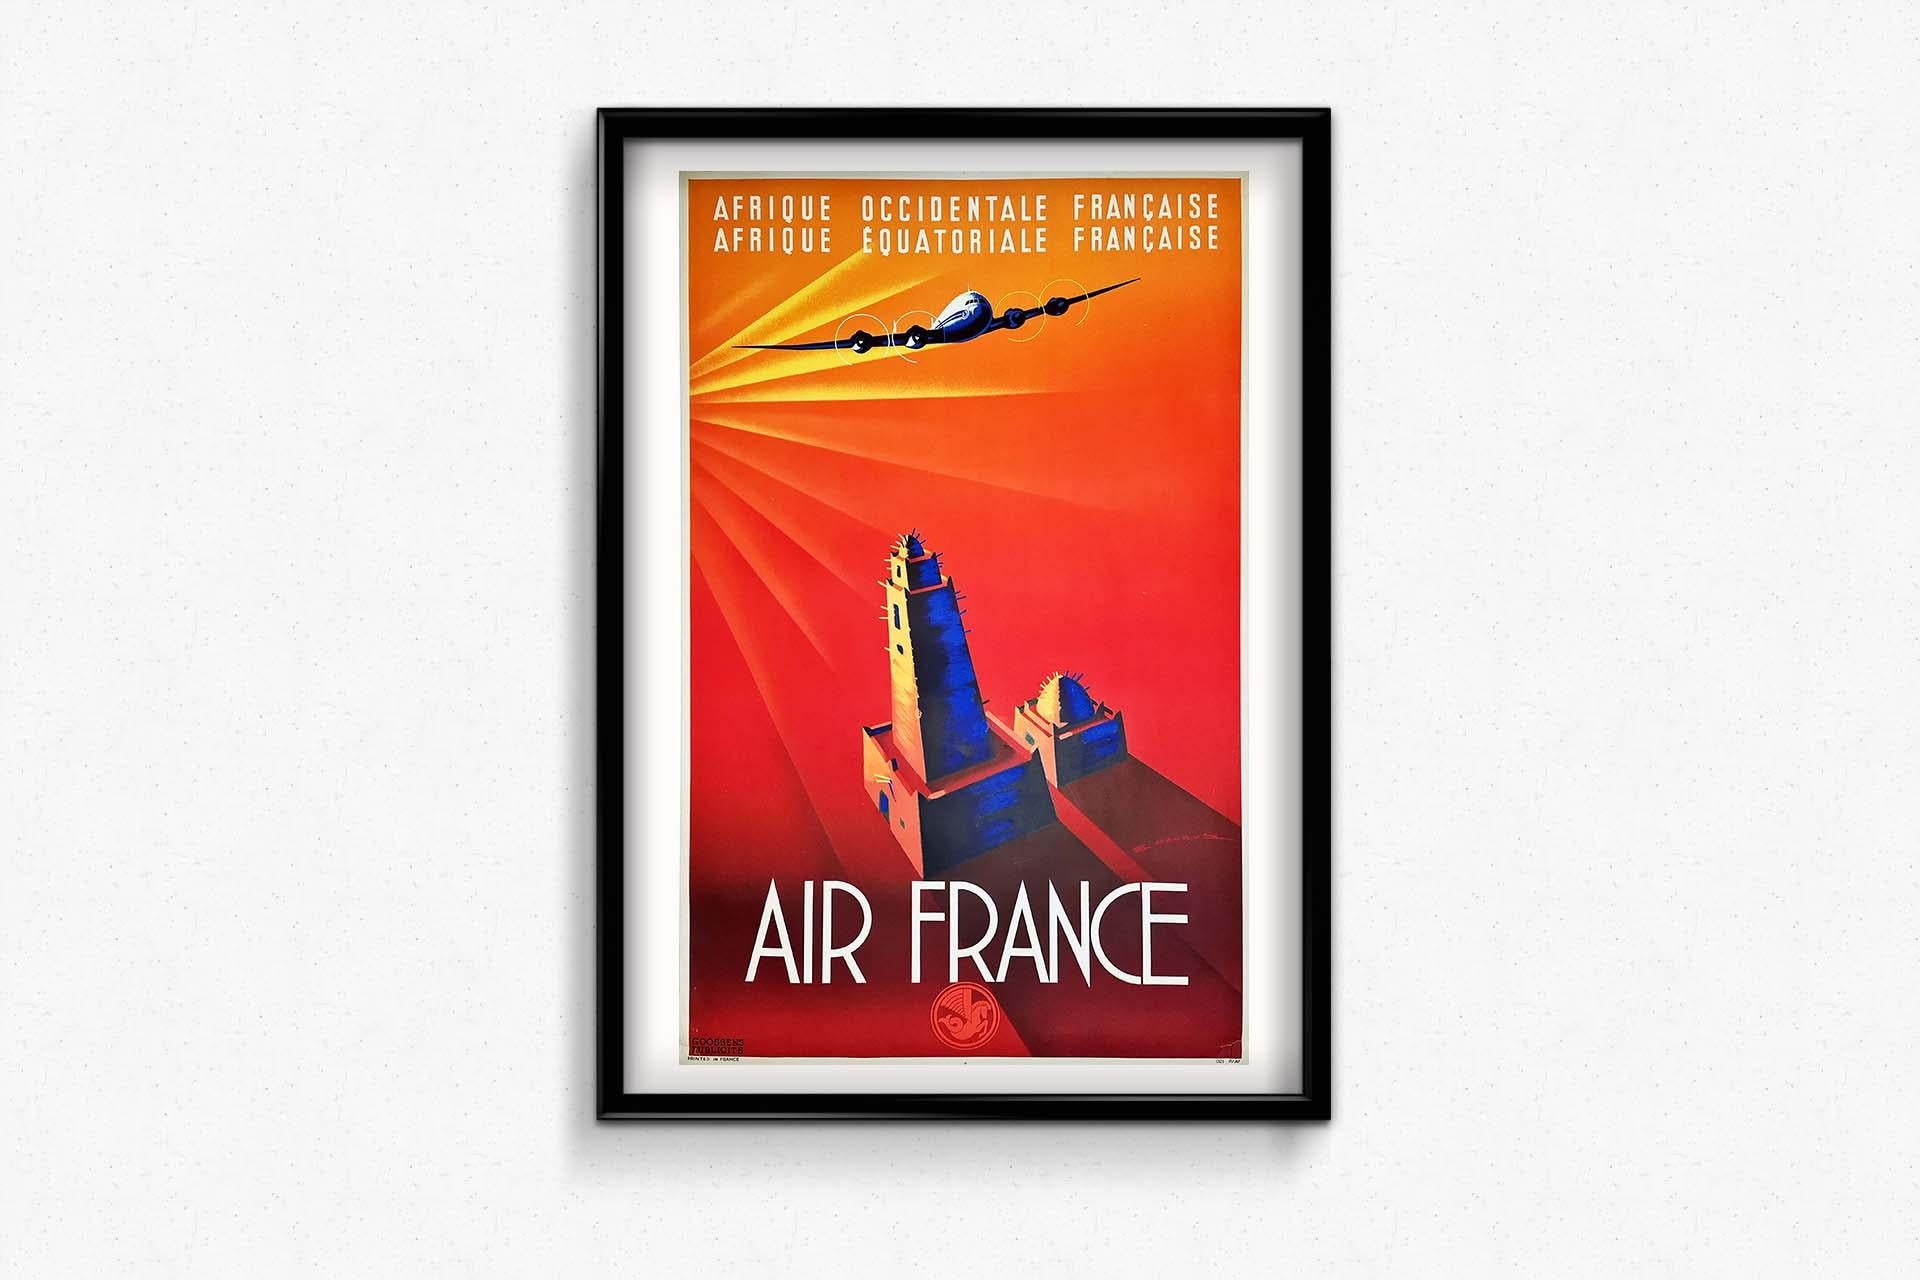 1946 Original Vintage Poster by E. Maurus Air France Art Deco French West Africa For Sale 2